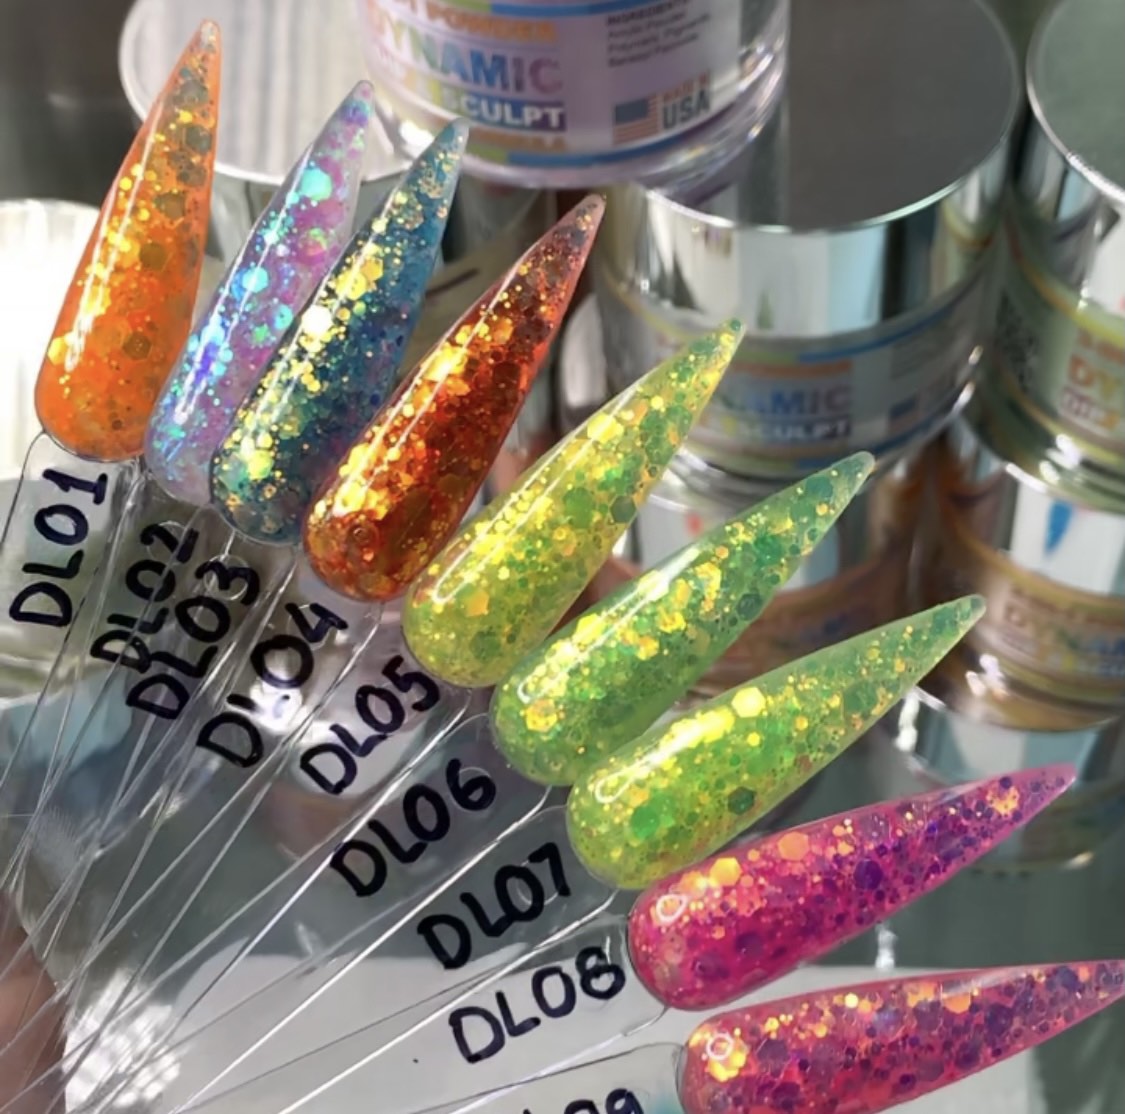 Fall Glitters Colors Acrylic Collection Part 2 - Mix sizes glitter Acr –  Dynamic Nail Supply